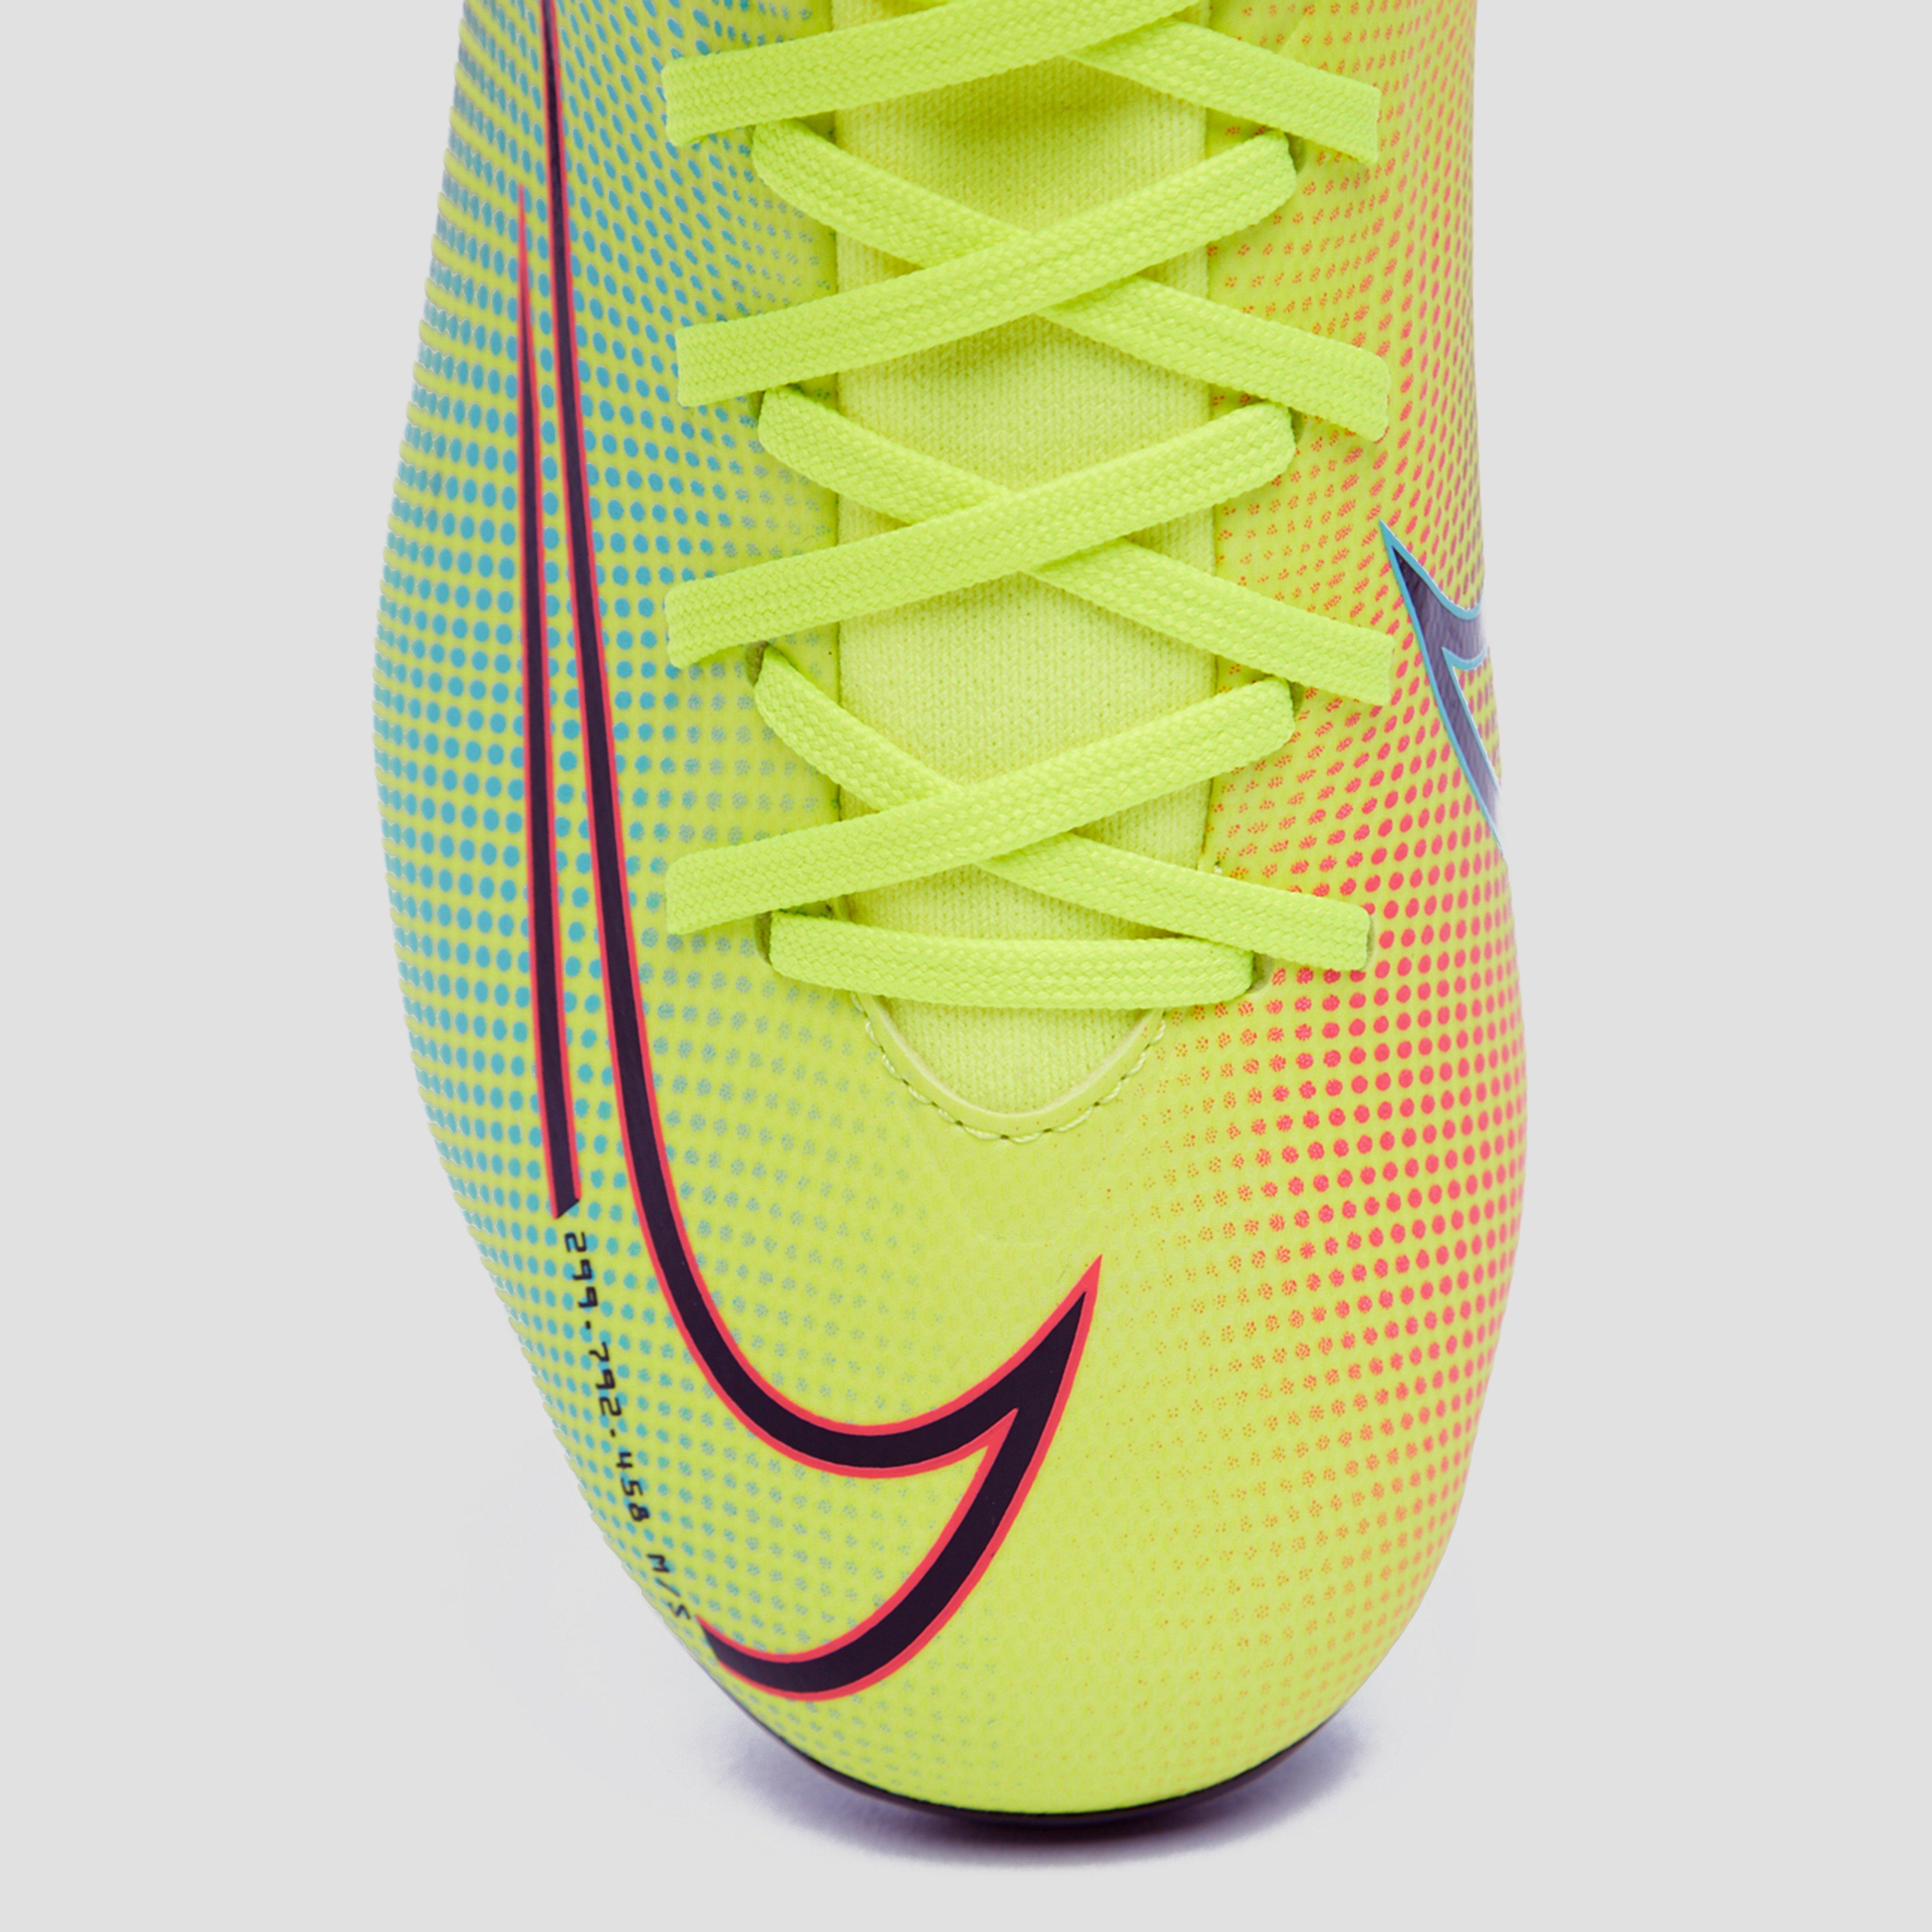 Nike Mercurial Superfly 6 Academy MG Soccer Cleat Men 's.